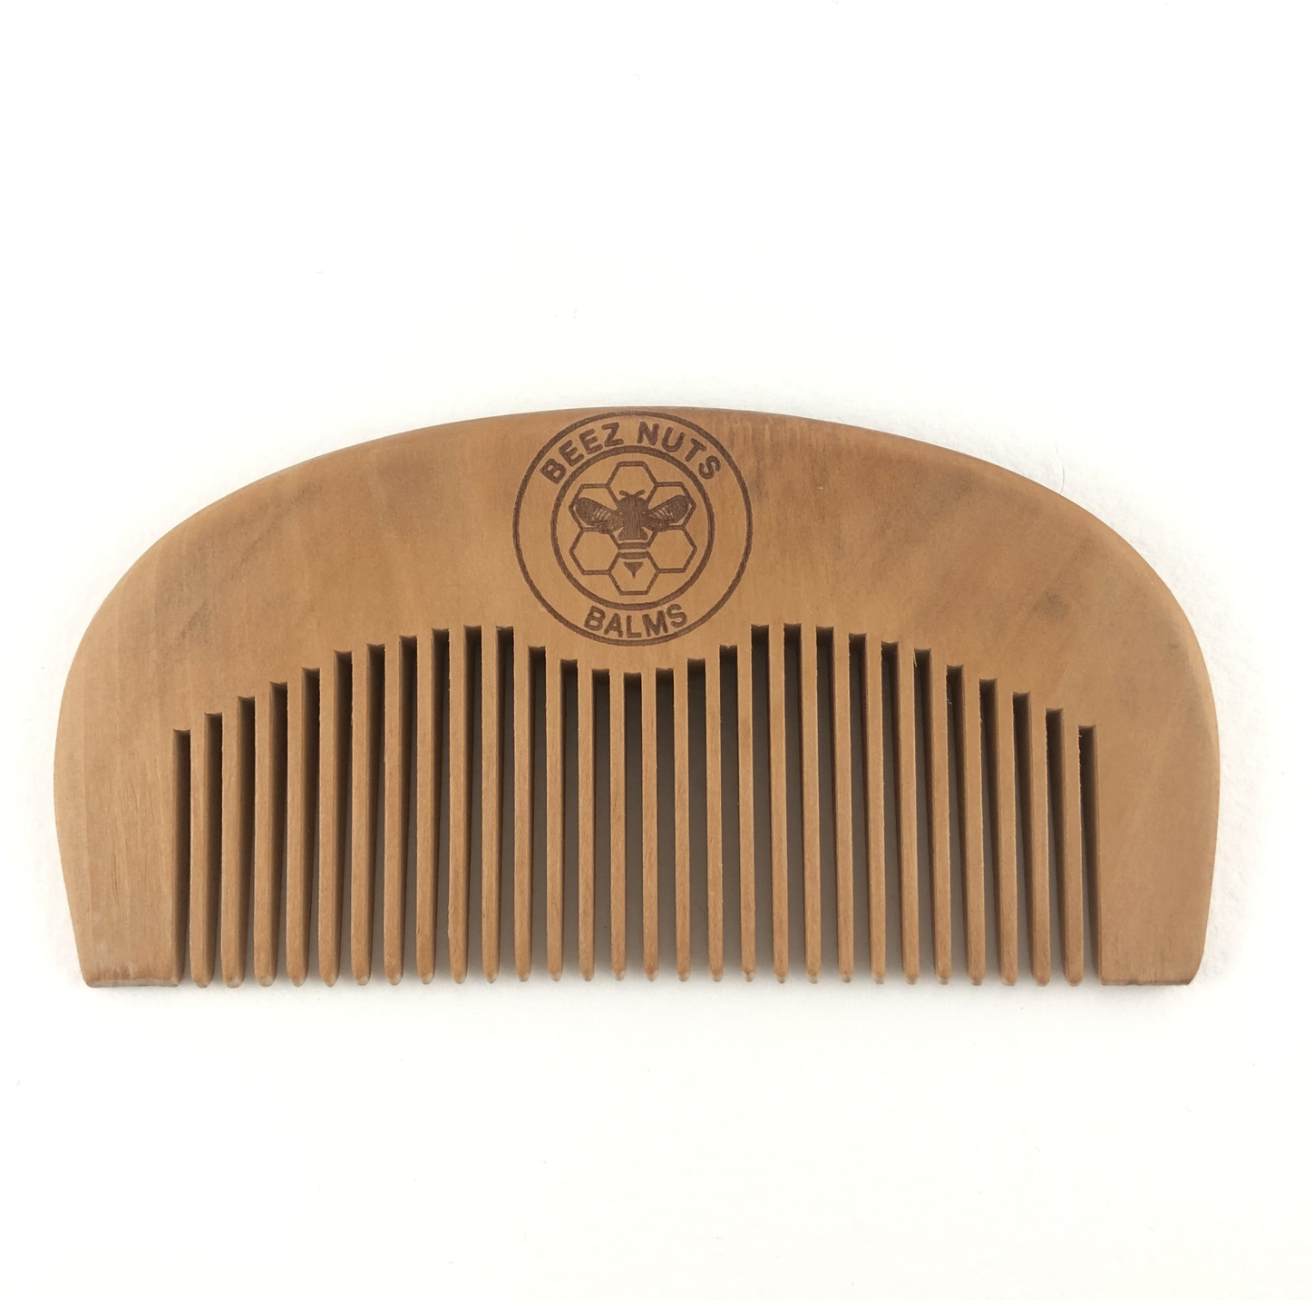 Hair & Beard Comb by Beez Nuts